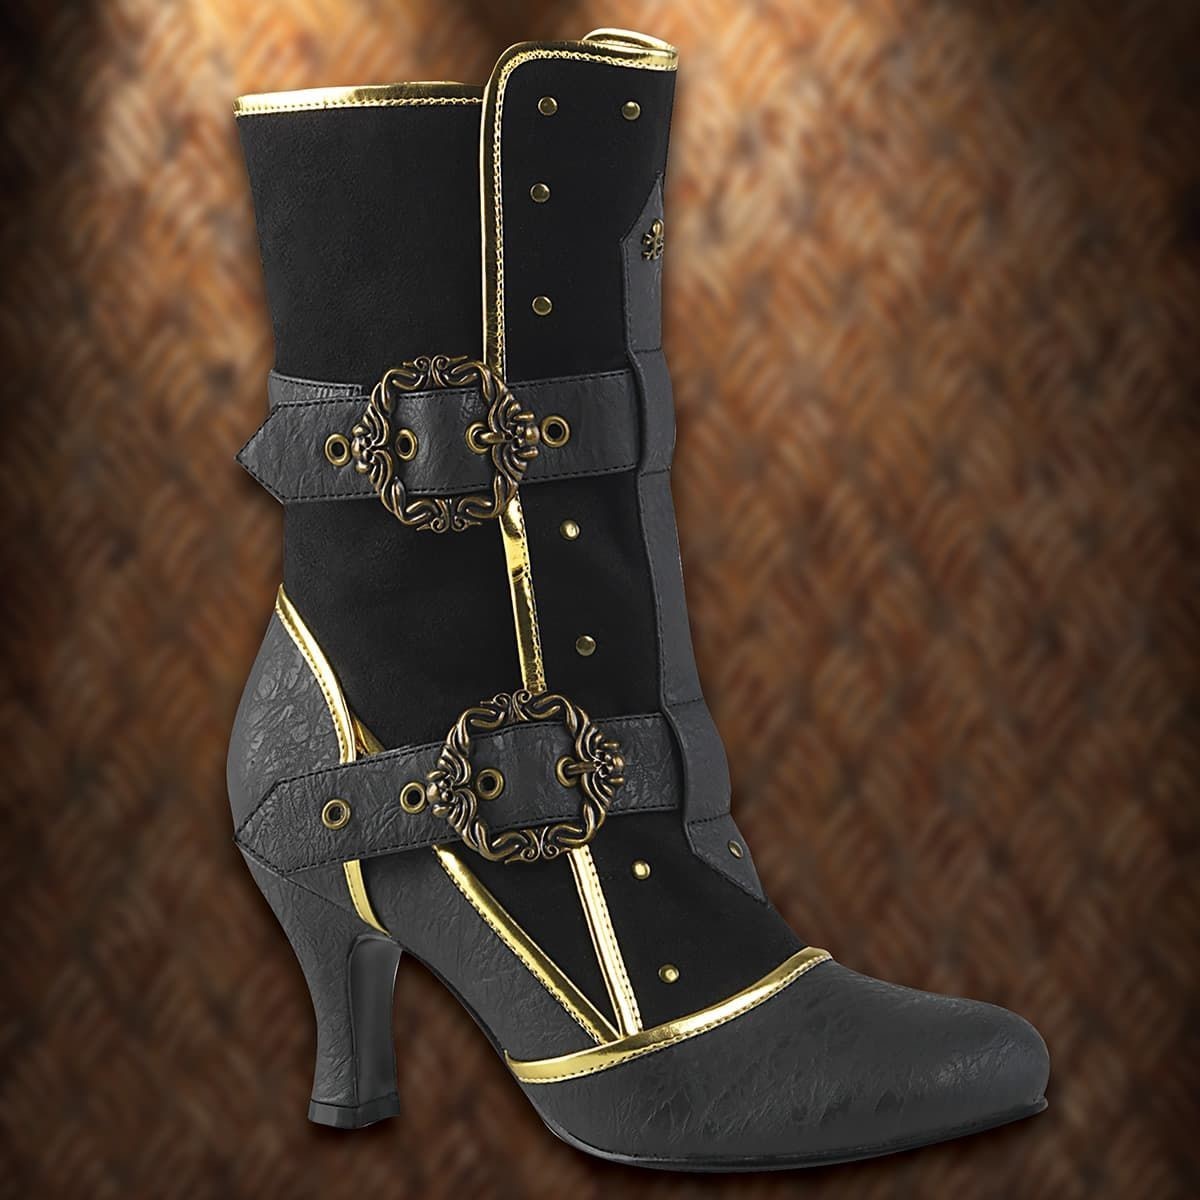 Black Gold Victorian Steampunk Pirate Edwardian Womans Costume Ankle Boots 7 8 9 